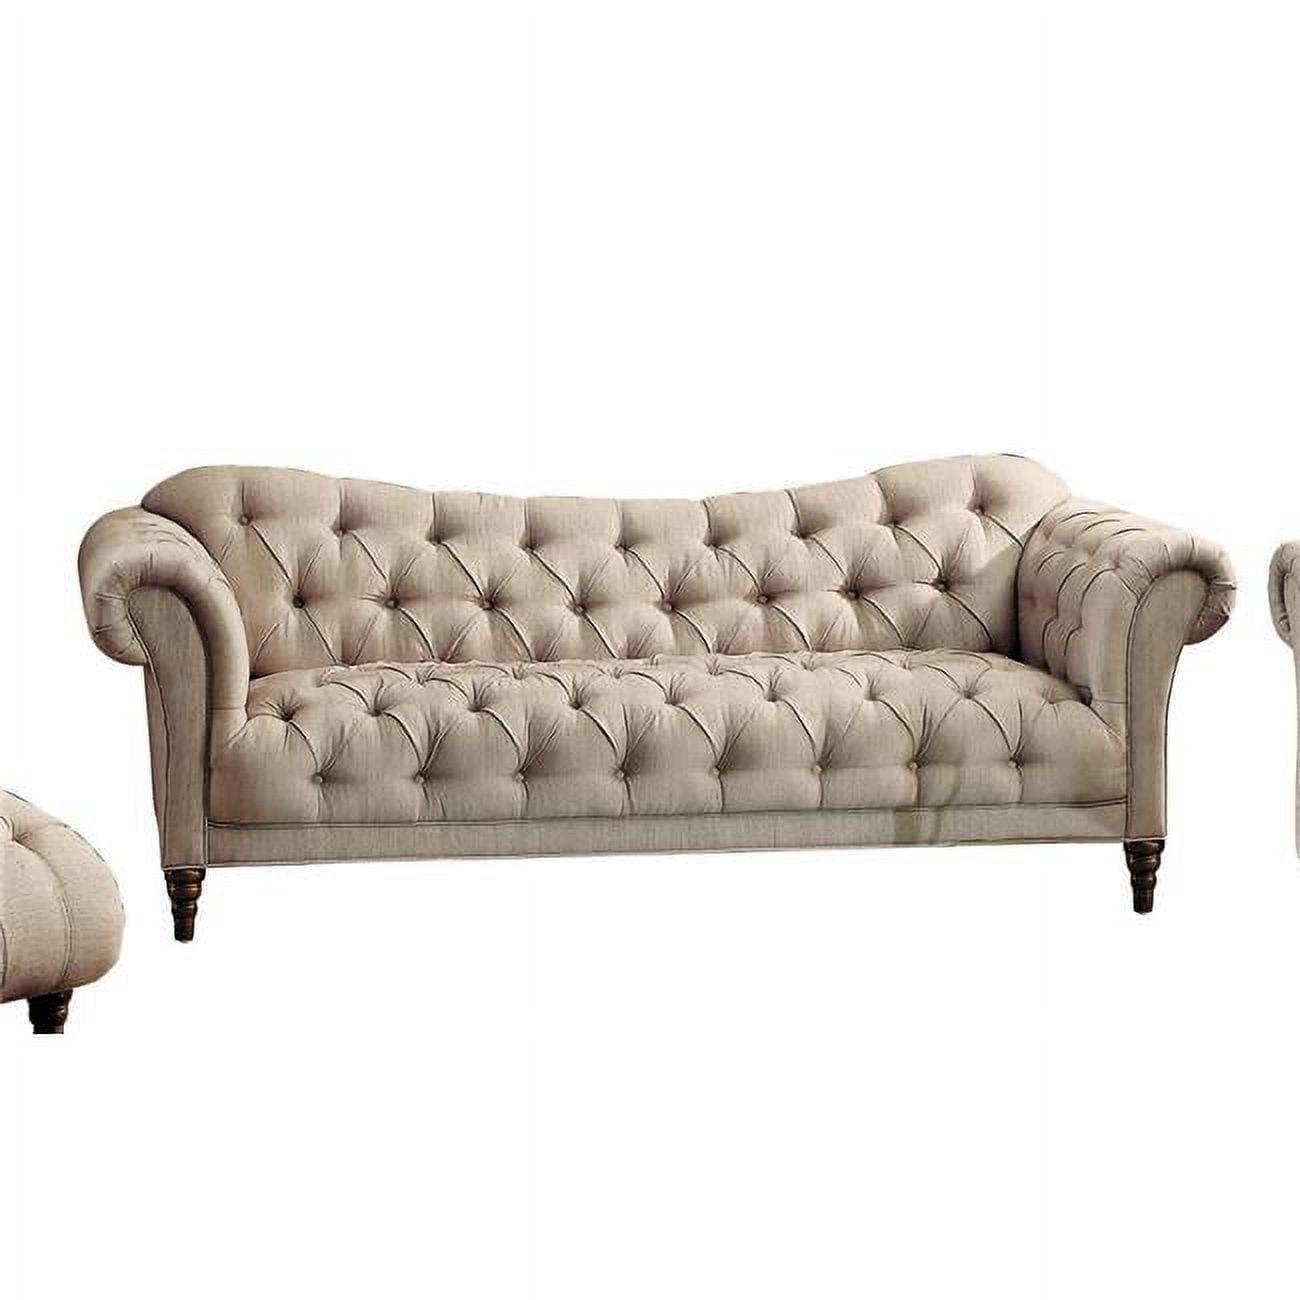 St. Claire Traditional Button-Tufted Sofa in Almond Brown